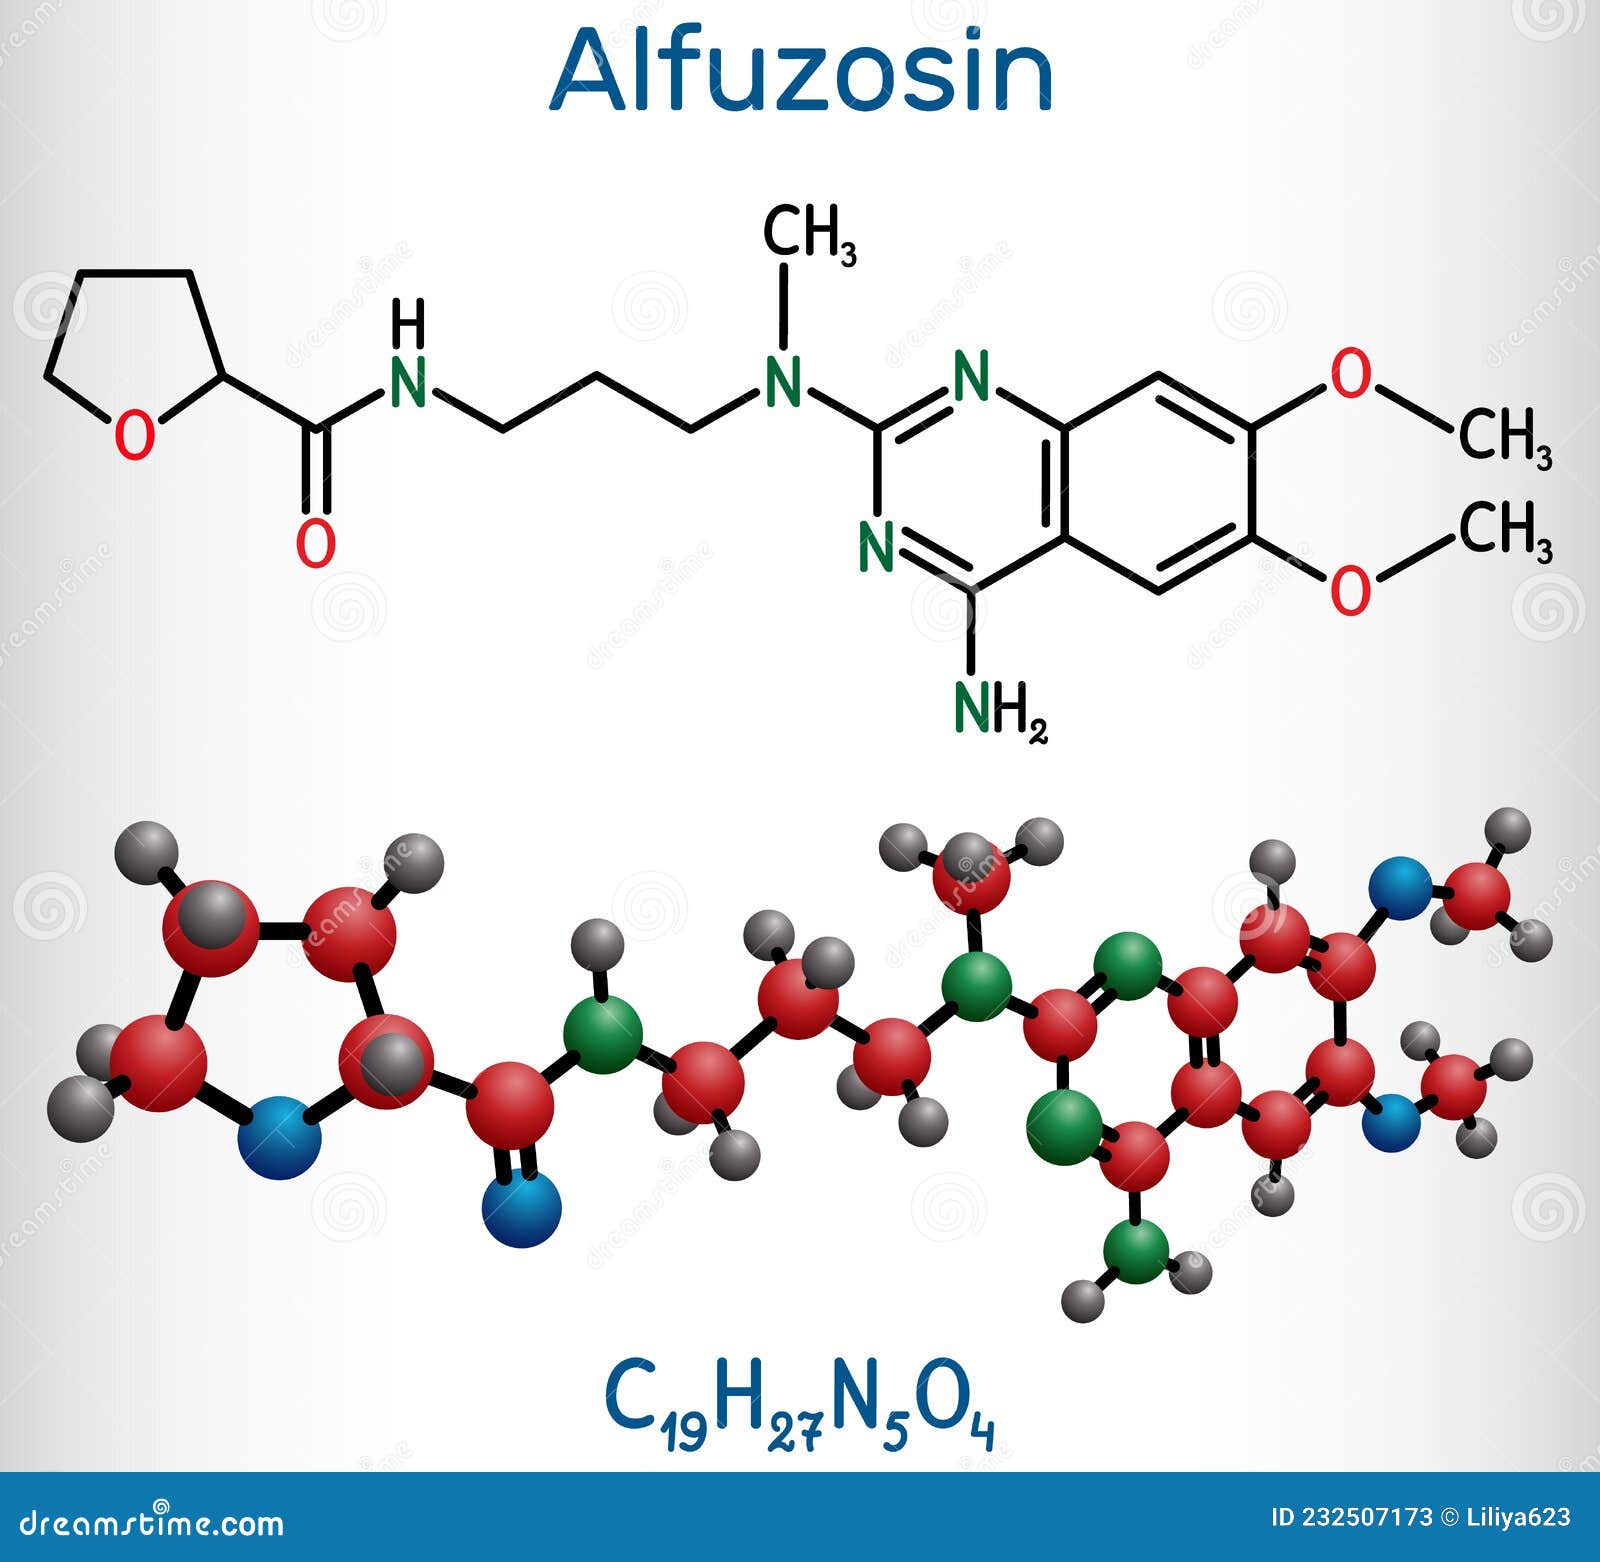 alfuzosin molecule. it is antineoplastic agent, an antihypertensive agent, an alpha-adrenergic antagonist. structural chemical